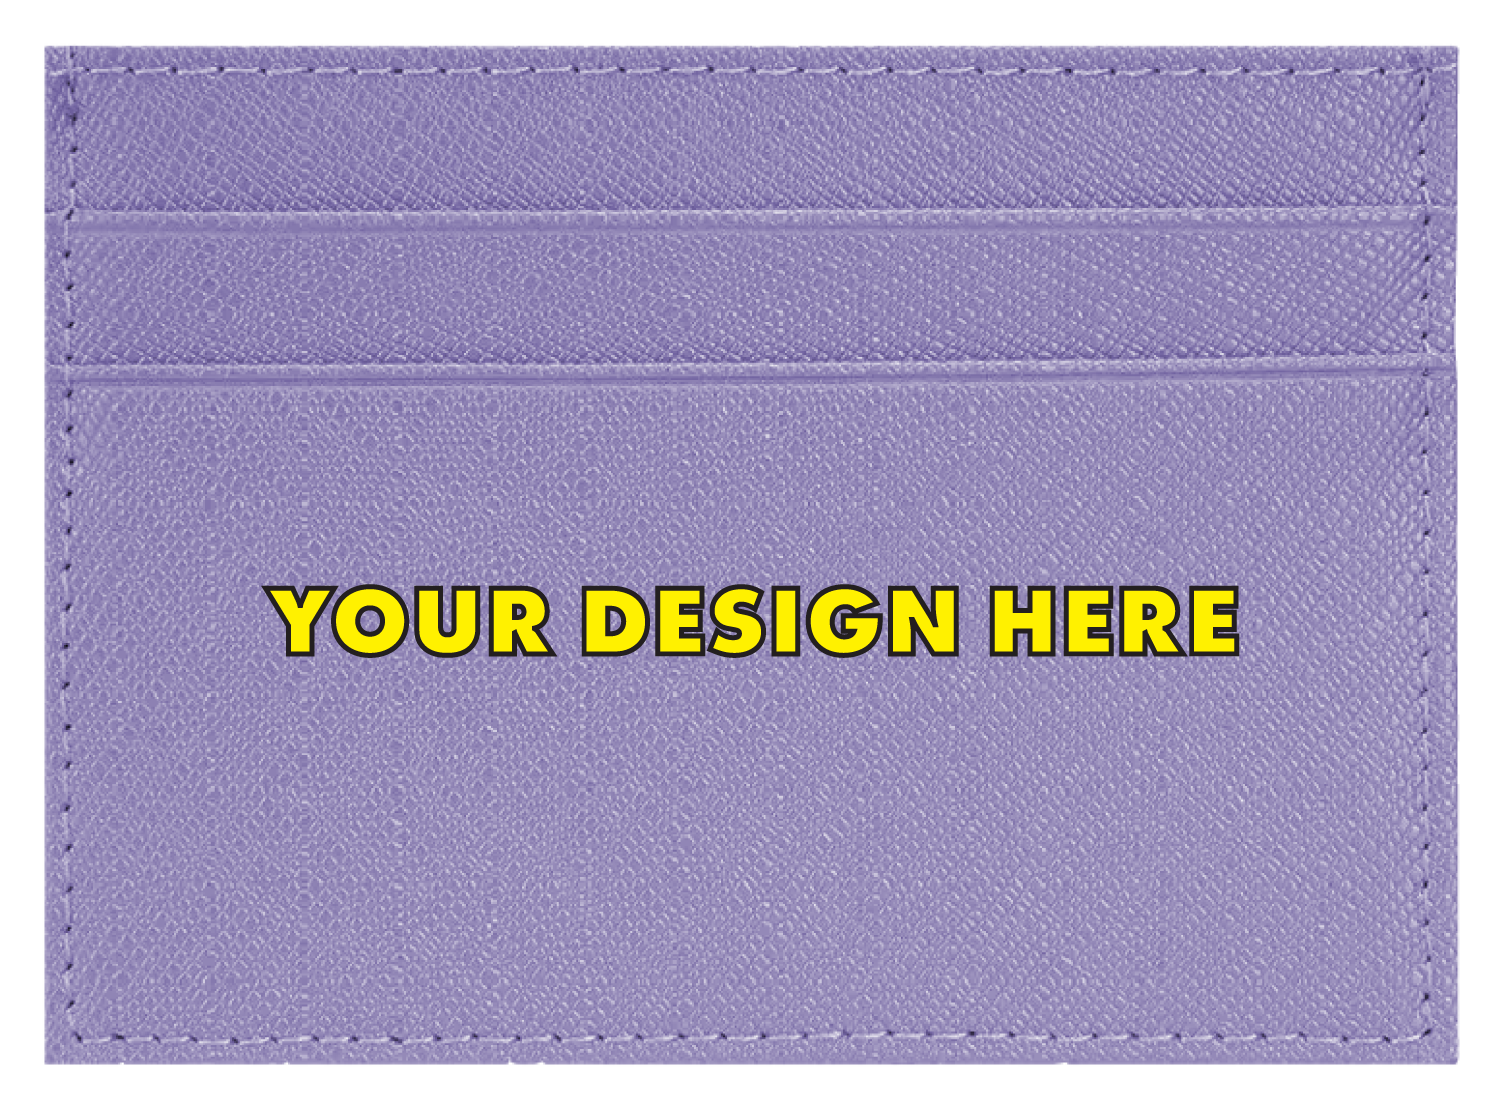 Create Your Own - Leather Wallet (Purple)